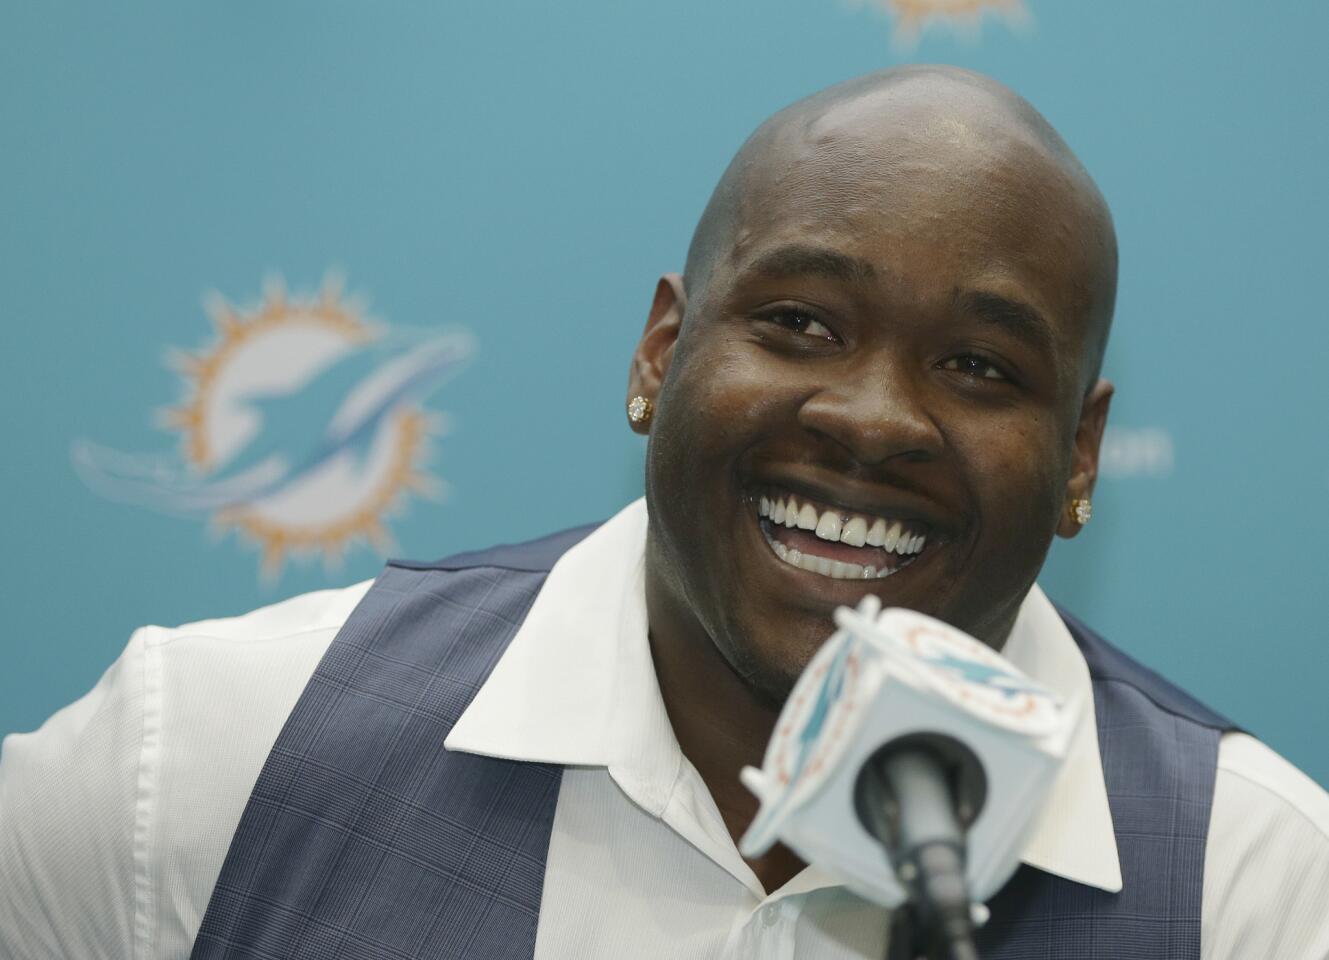 Laremy Tunsil smiles during a press conference at the Dolphins' facility a day after being drafted with the No. 13 overall pick.